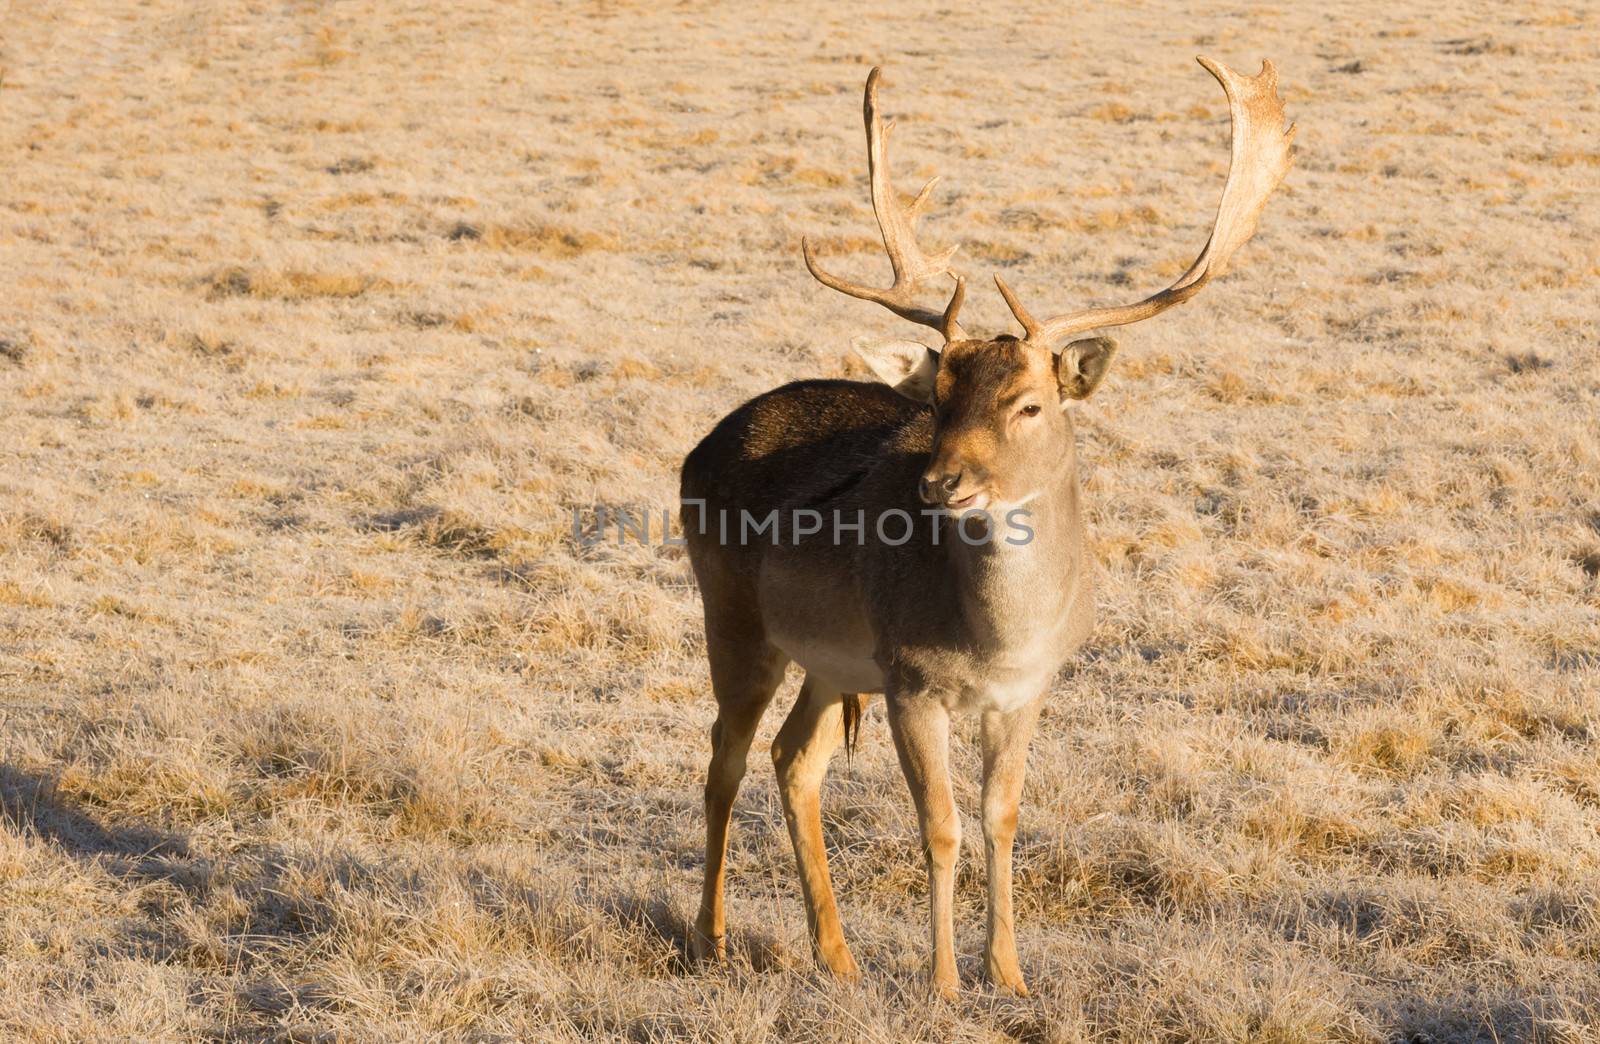 A young male Deer stays close to engage with photographer